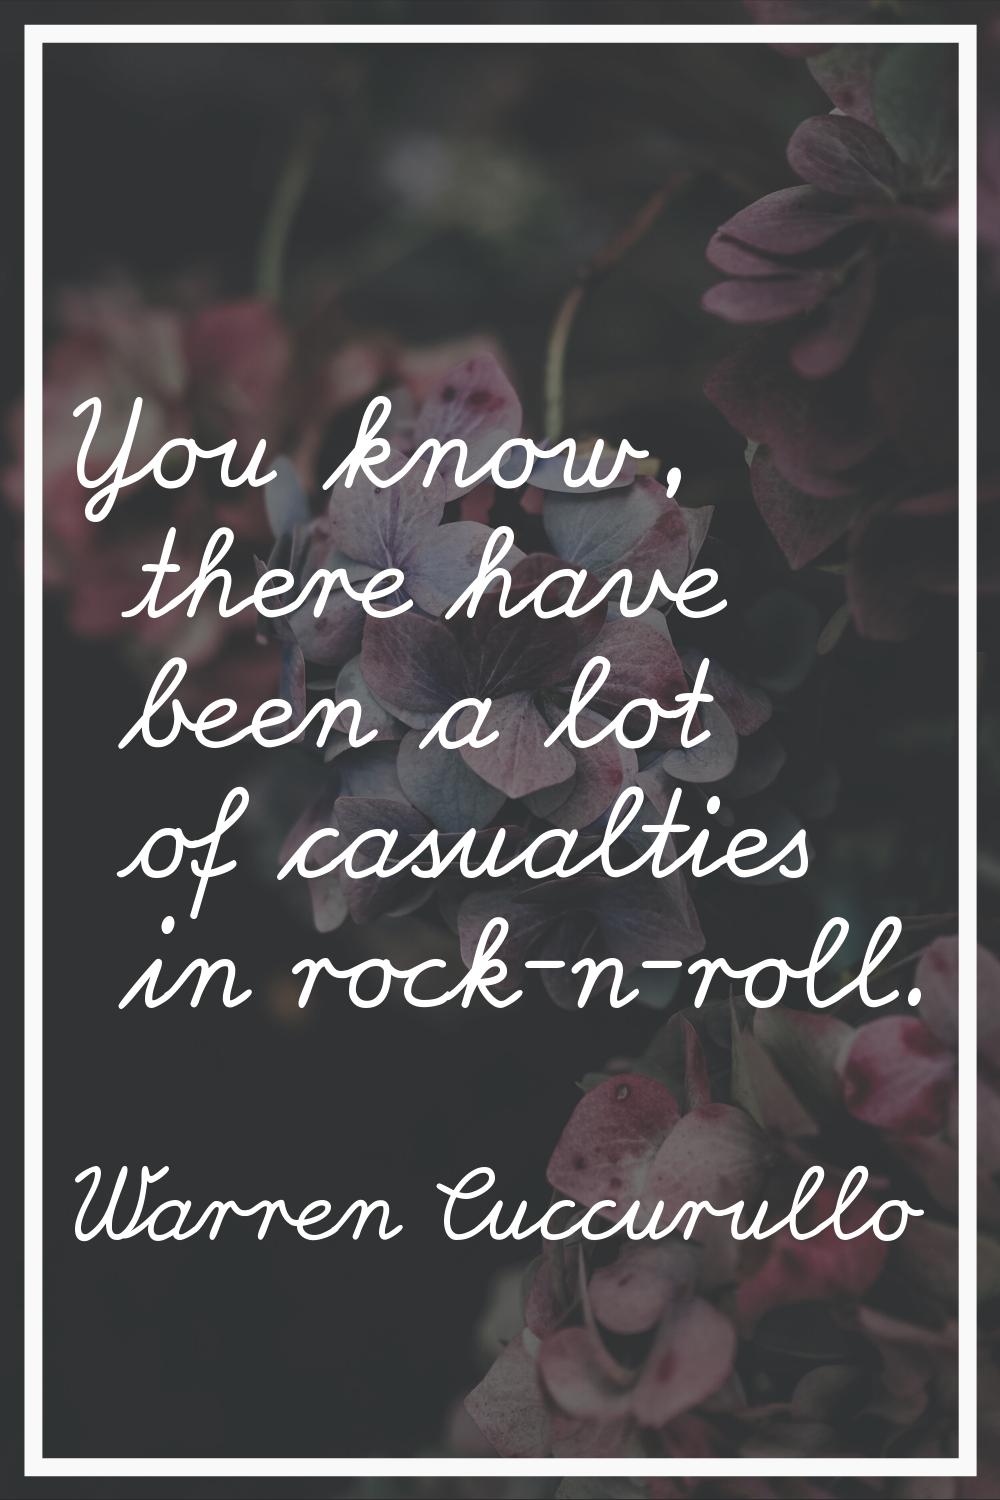 You know, there have been a lot of casualties in rock-n-roll.